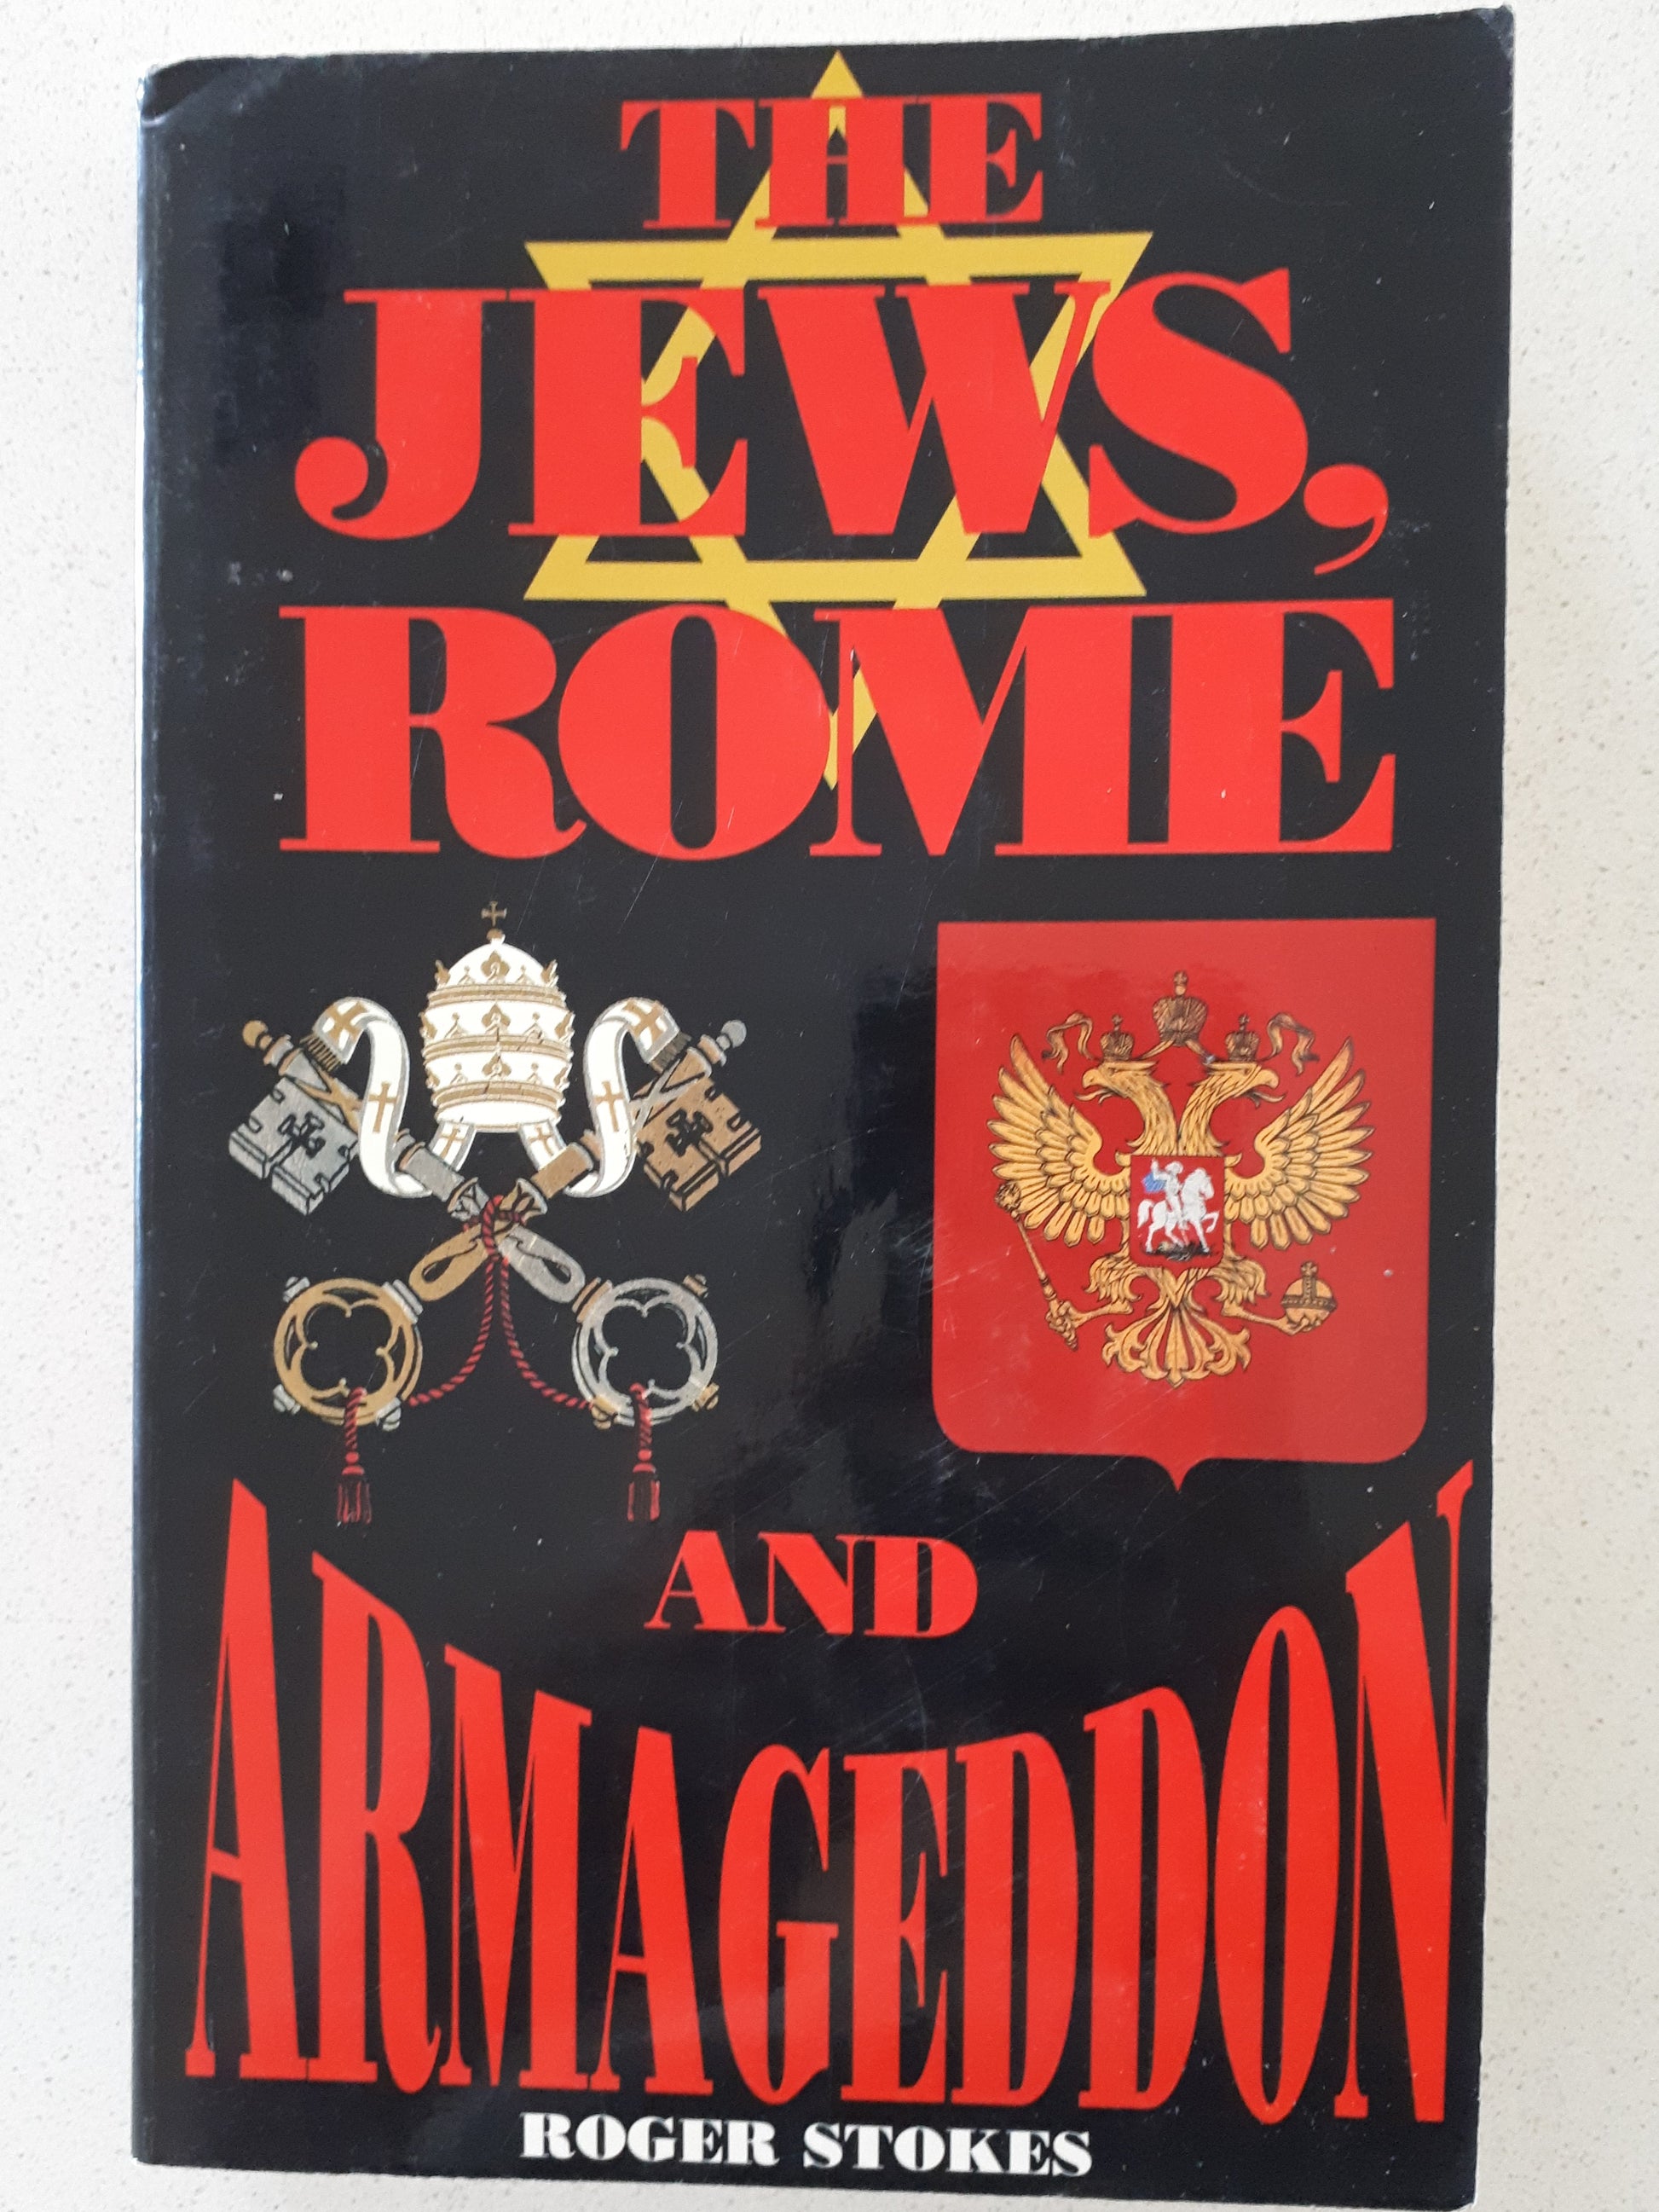 The Jews, Rome and Armageddon by Roger Stokes